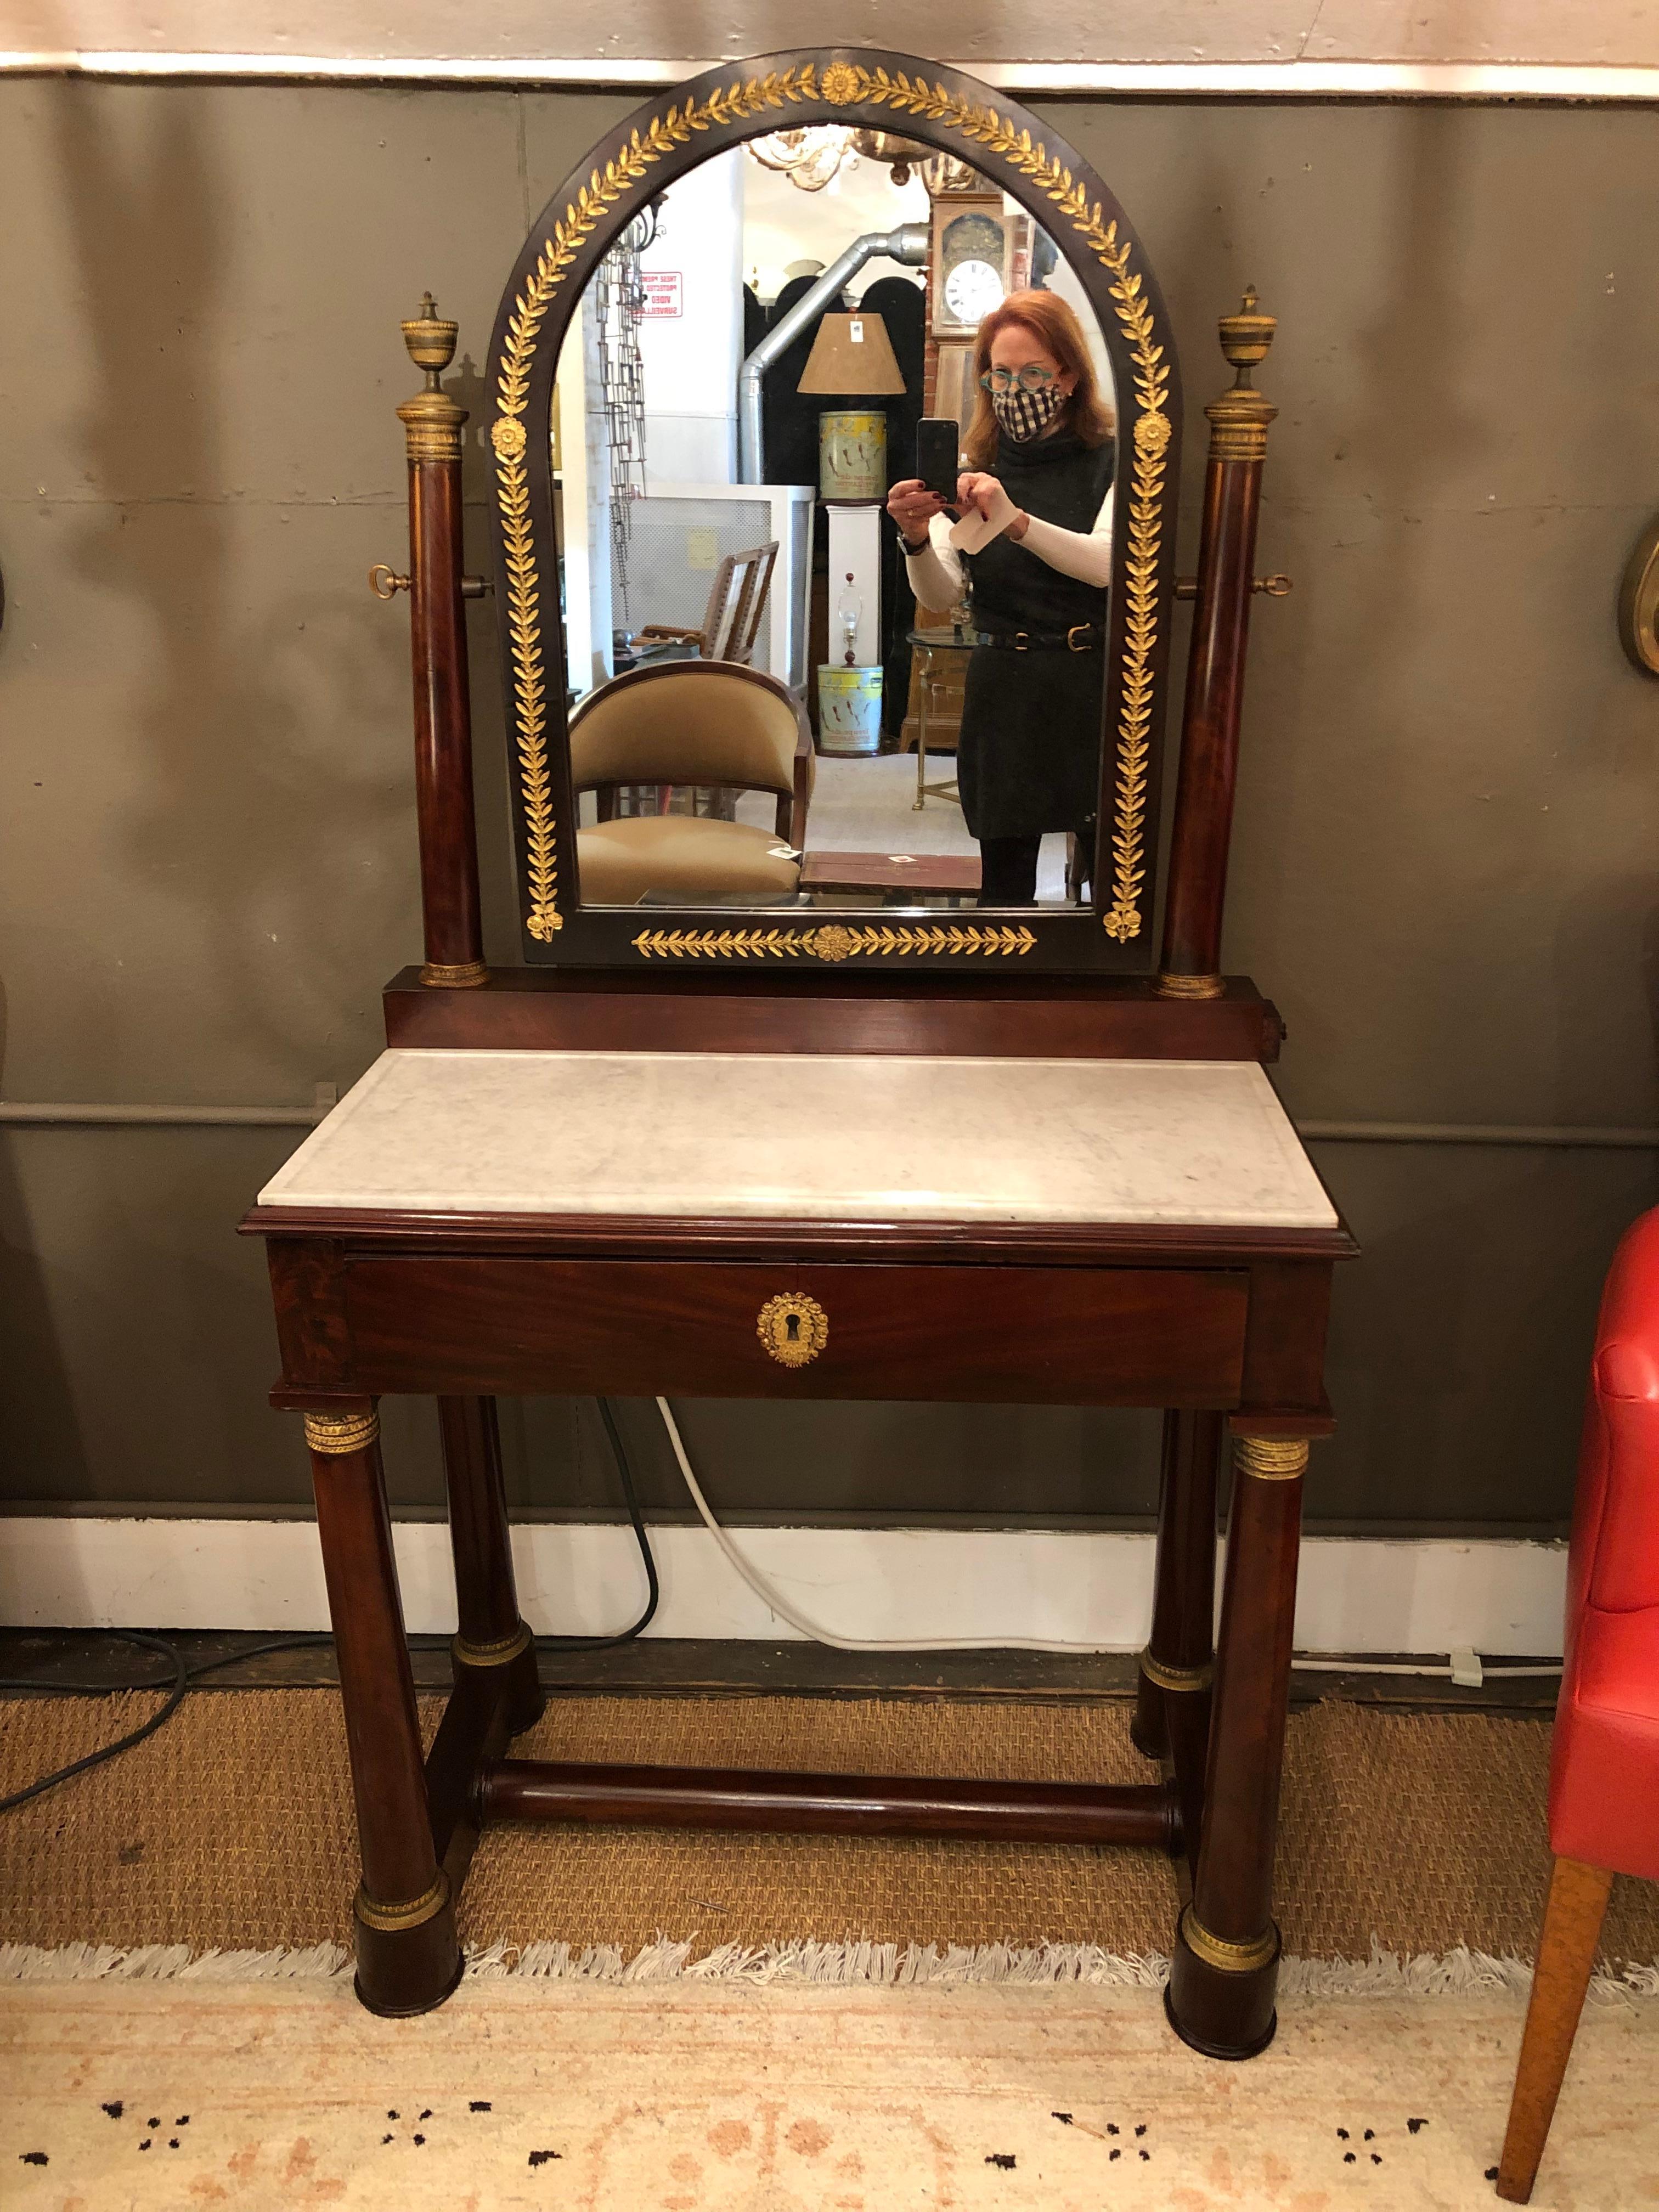 Elegant mahogany Federal style antique vanity table having gorgeous bronze details and white marble top. There's a single drawer and two mini side drawers.
Original key included.
Measure: Table height 30.5.